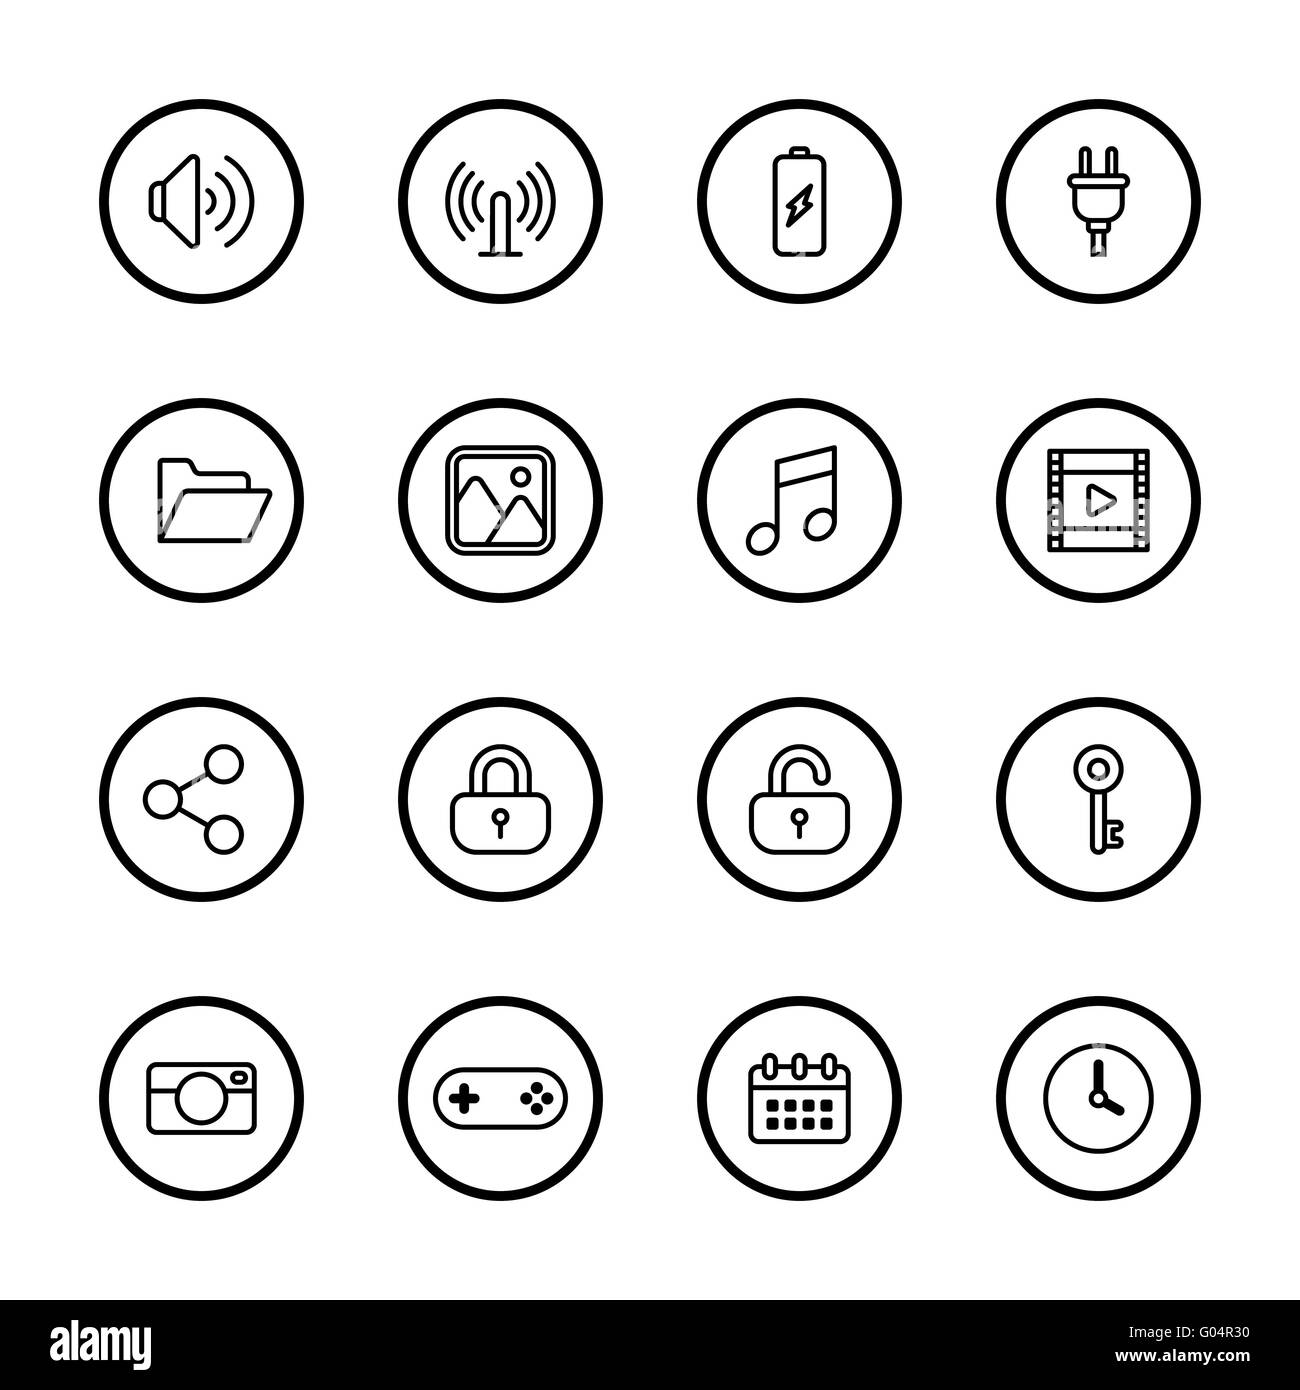 [JPEG] black line web icon set with circle frame for web, UI, infographic and mobile apps Stock Photo